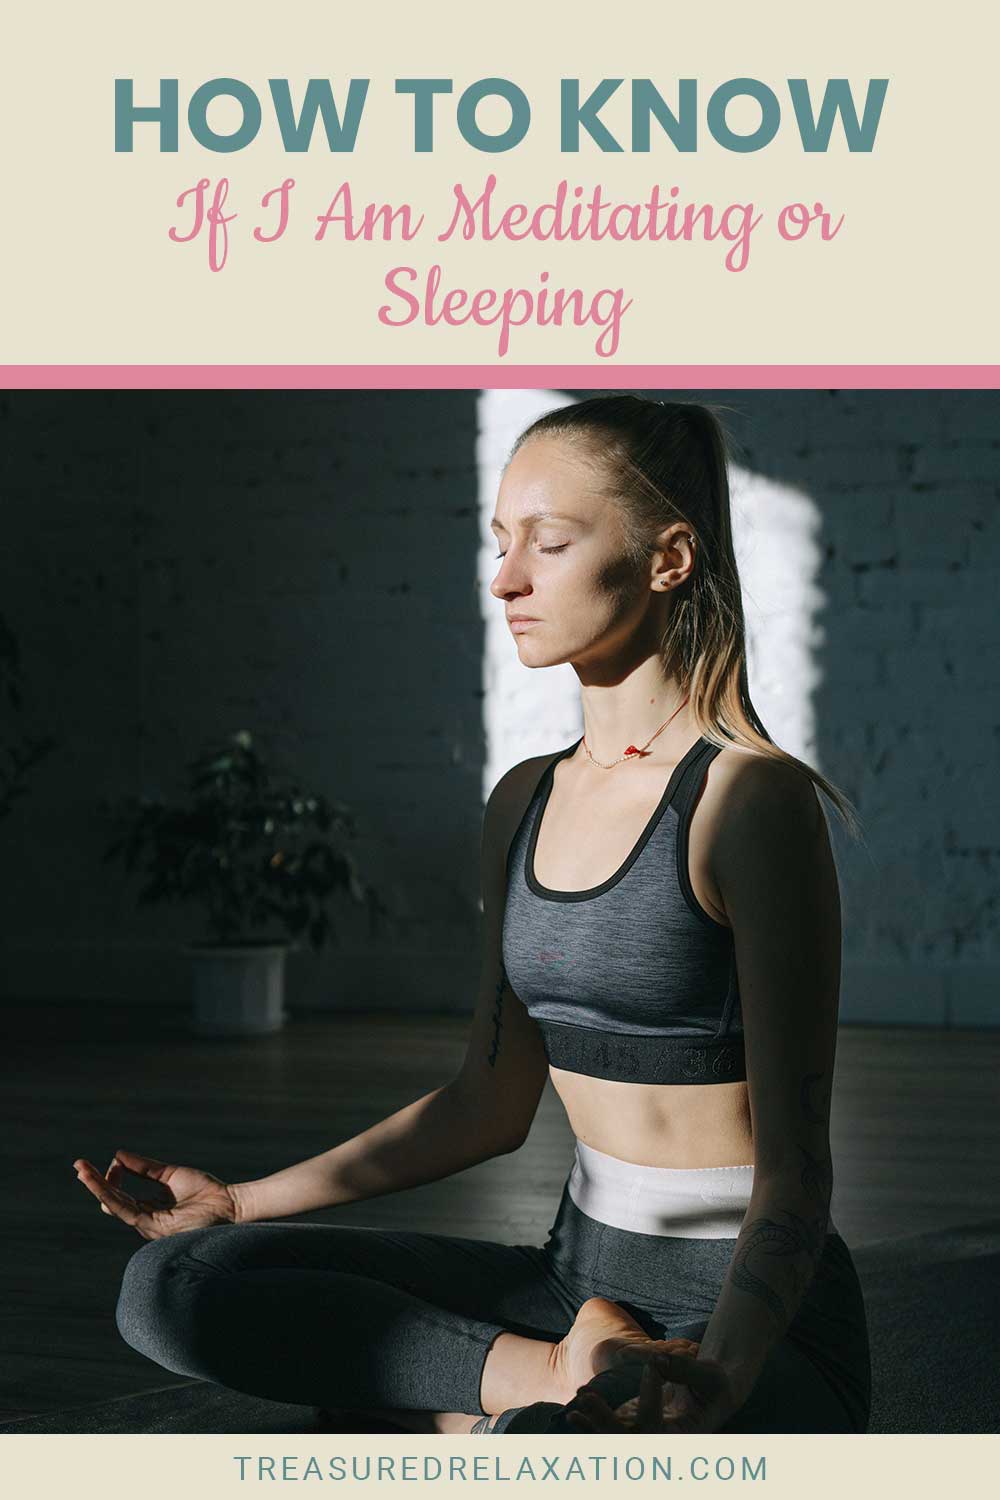 Woman meditating in a dark room when light from outside falls on her - How to Know If I Am Meditating or Sleeping